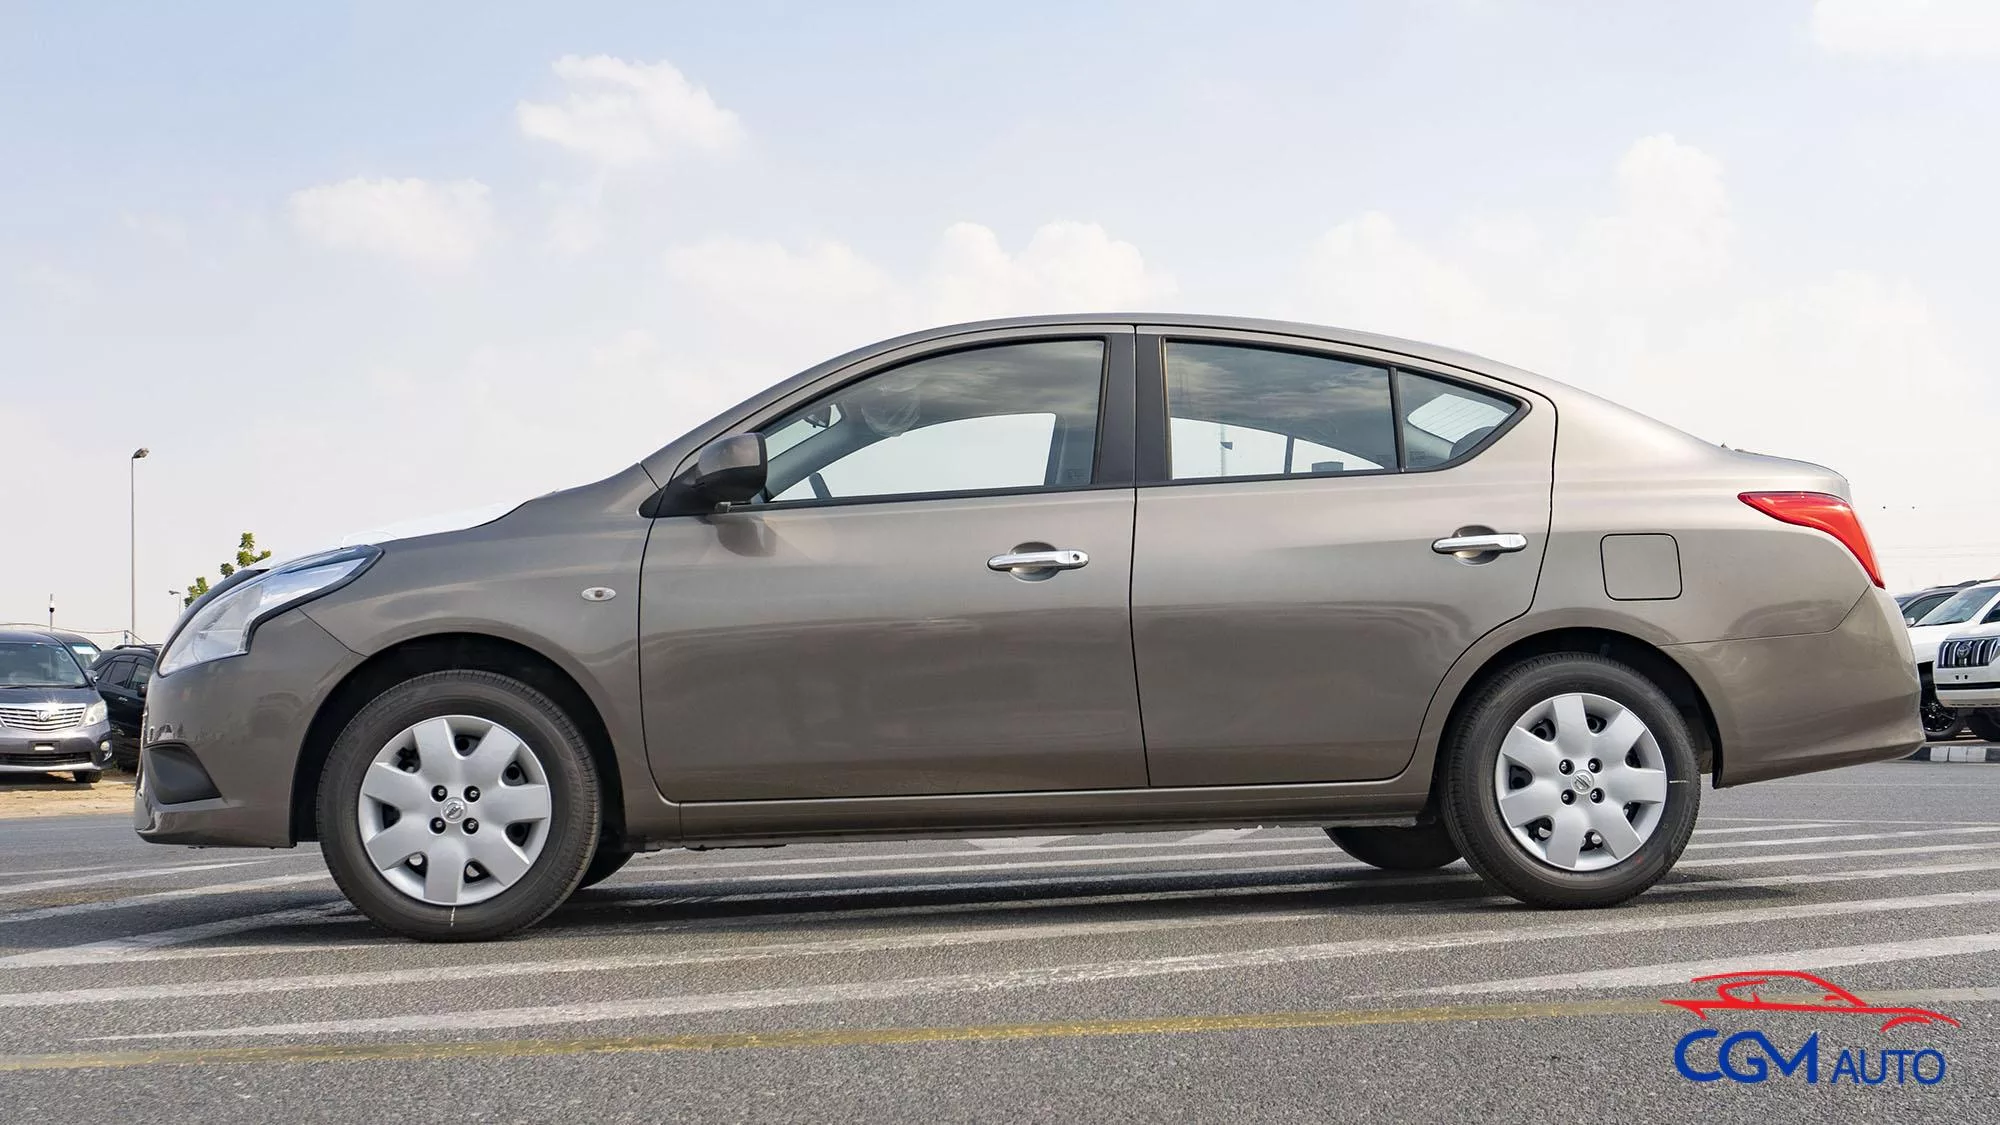 2023 Nissan Sunny New Car for sale in the UAE, Dubai, Sharjah and Abu Dhabi | Special Offers